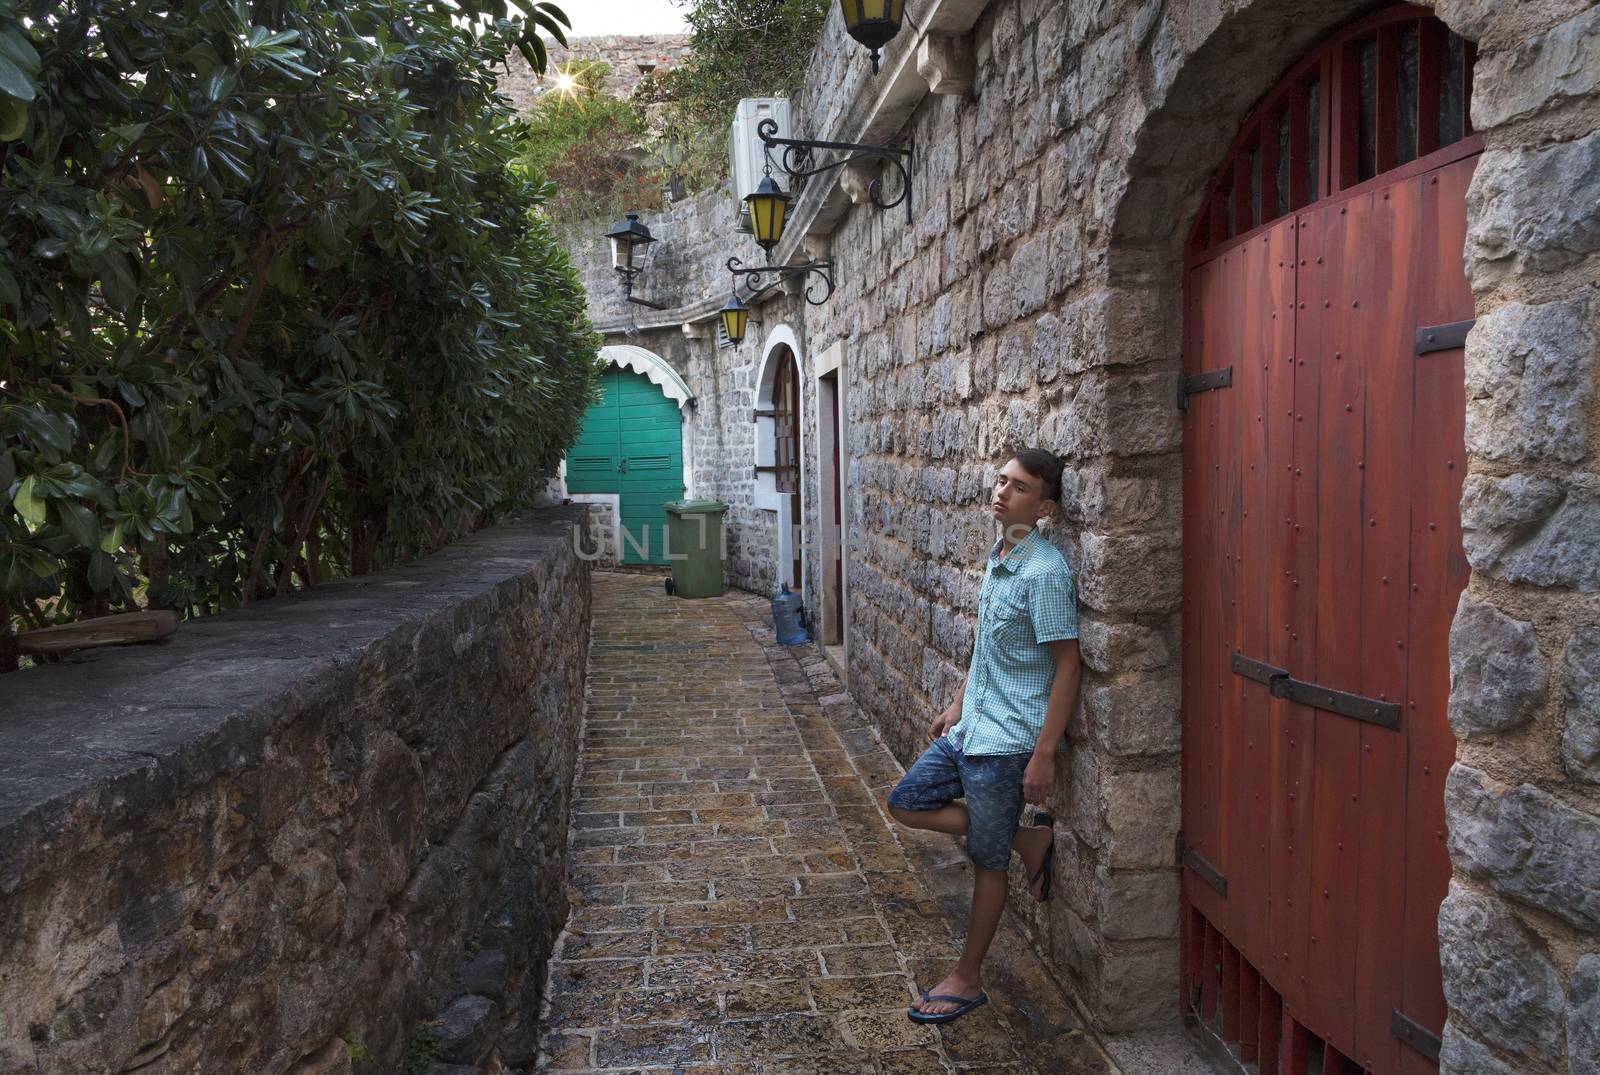 A thoughtful young man leaned his back against a stone wall in the narrow street of the old town of Budva, Montenegro.